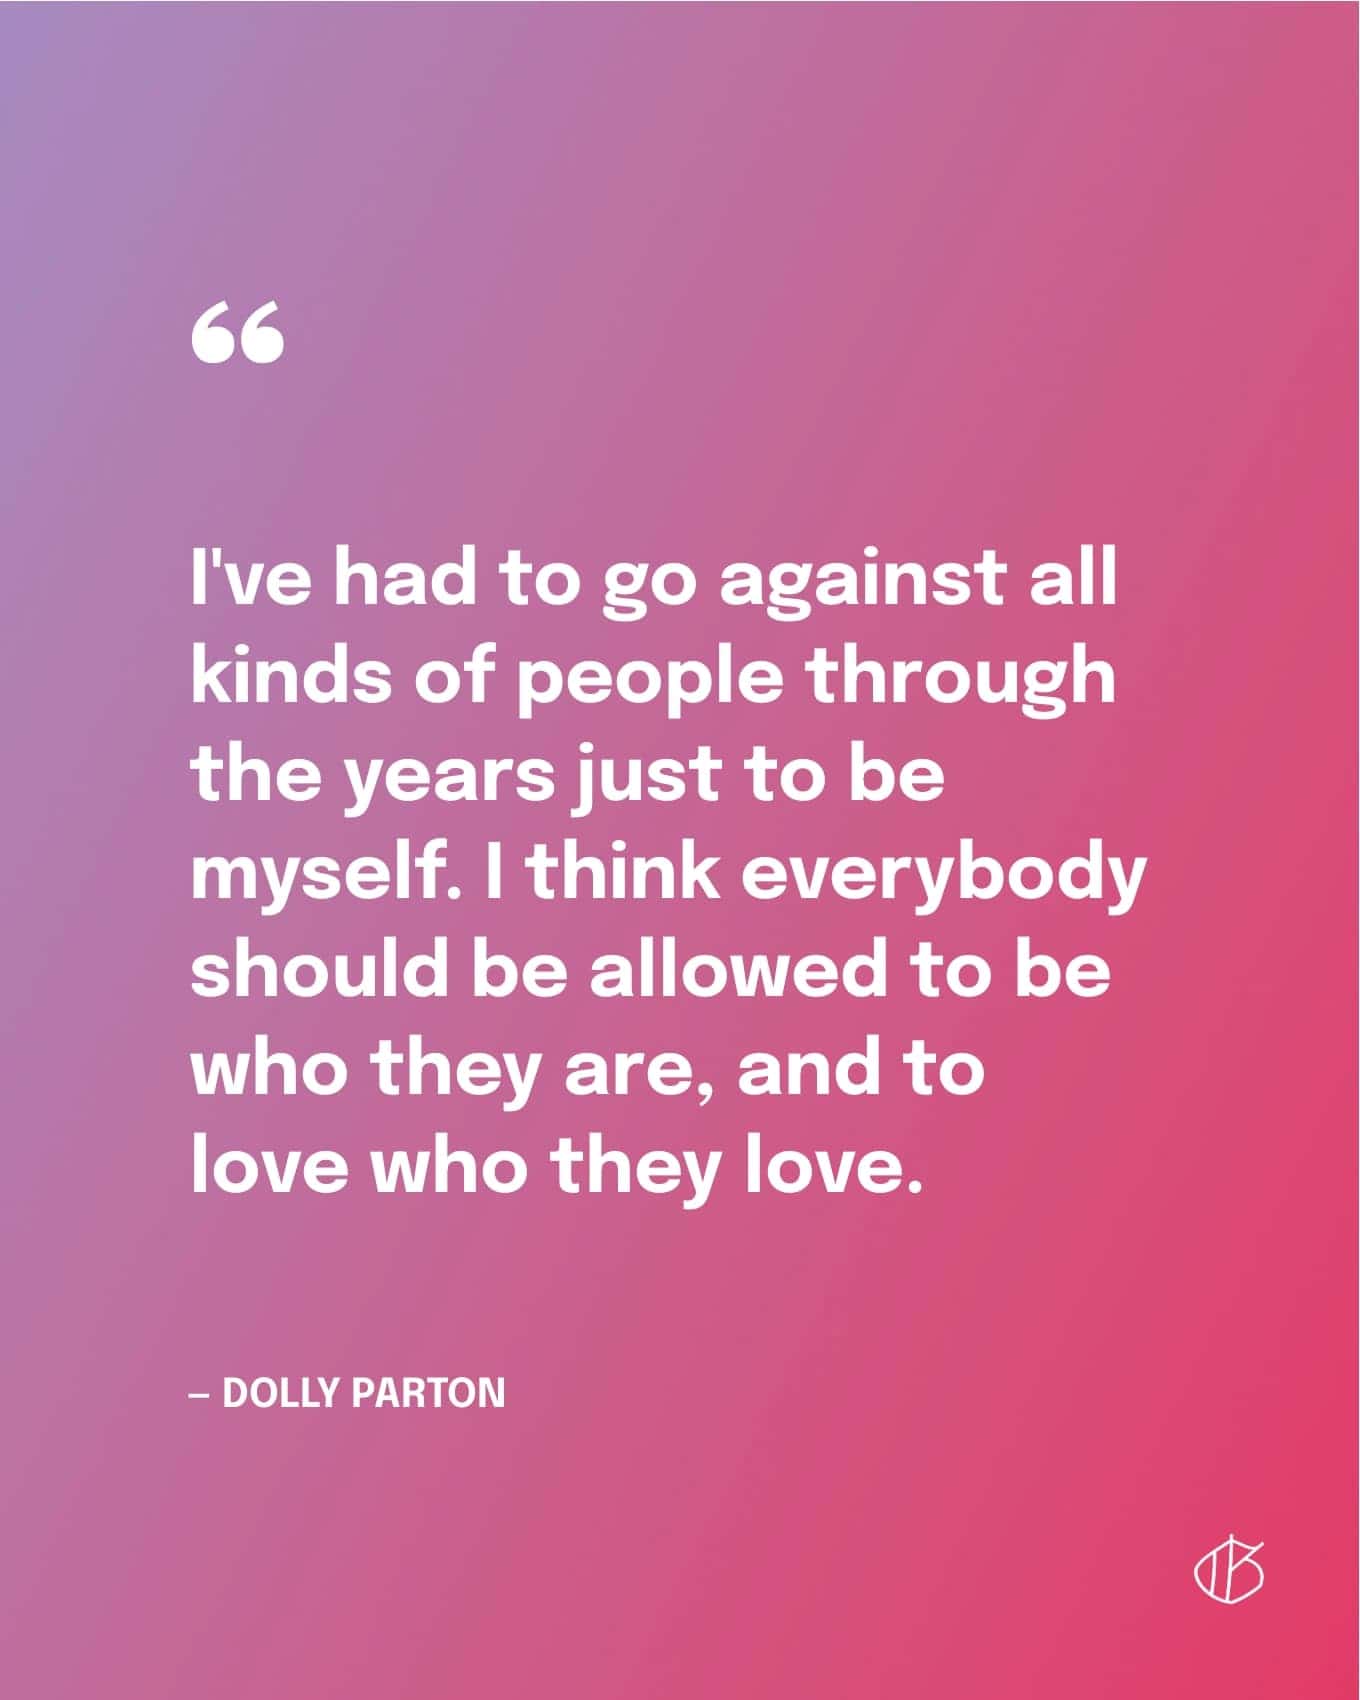 Dolly Parton Quote Wallpaper: I've had to go against all kinds of people through the years just to be myself. I think everybody should be allowed to be who they are, and to love who they love.